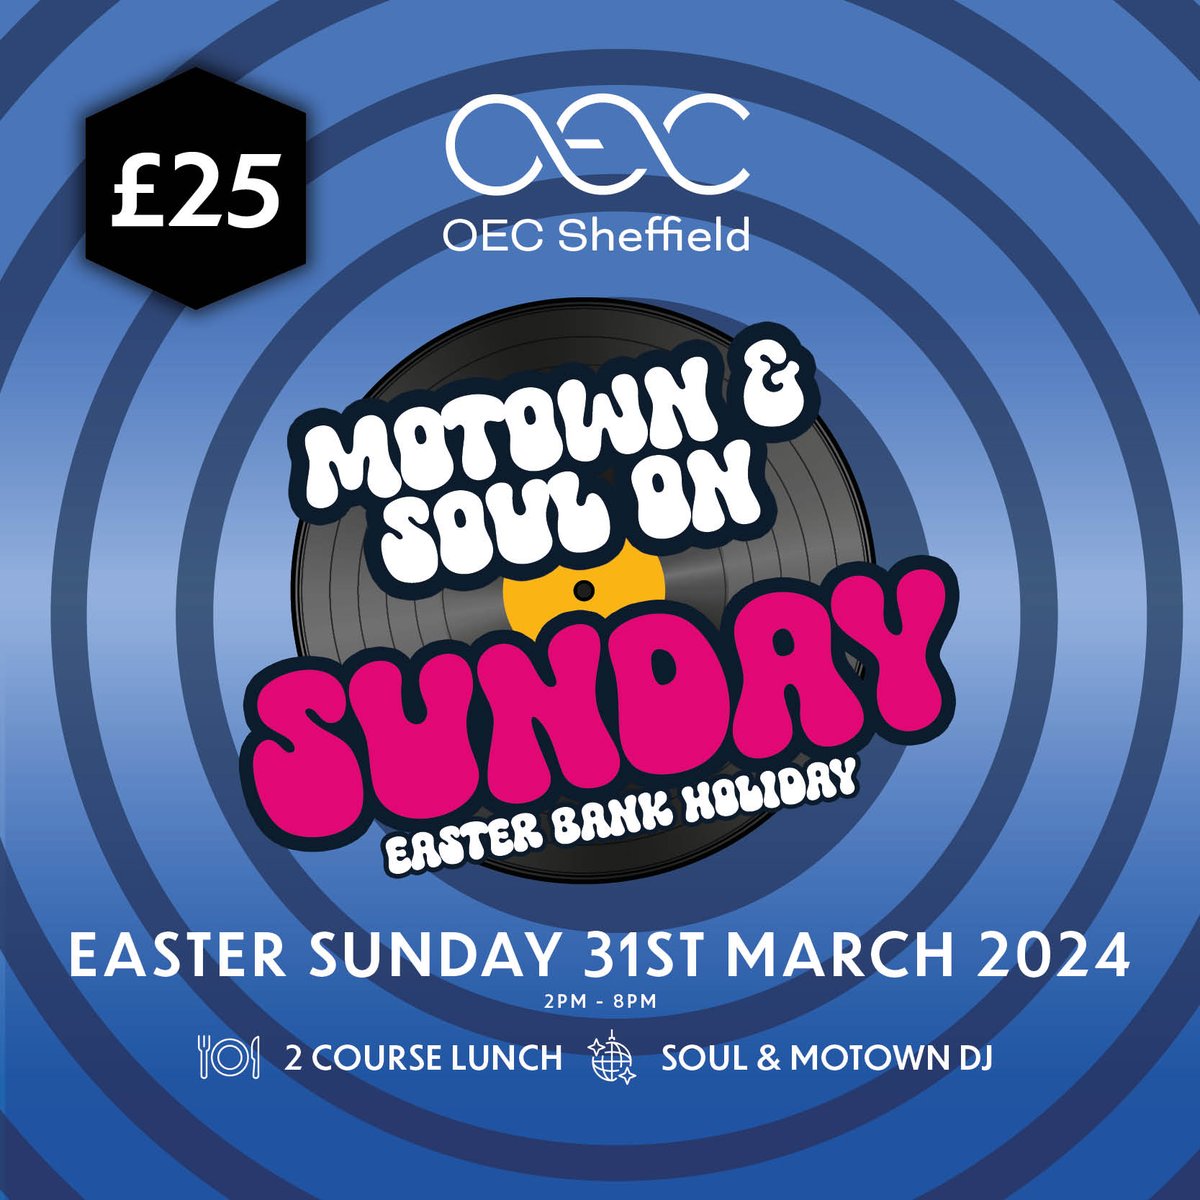 #Motown & #Soul On #EasterSunday 🐰
Join us for an afternoon of Motown & Soul #Anthems, Hits & Classics 🎤

🍽️ 2 Course Lunch
🪩 Soul & Motown DJ
🎟️ £25

See menu and book here: zurl.co/rHdO